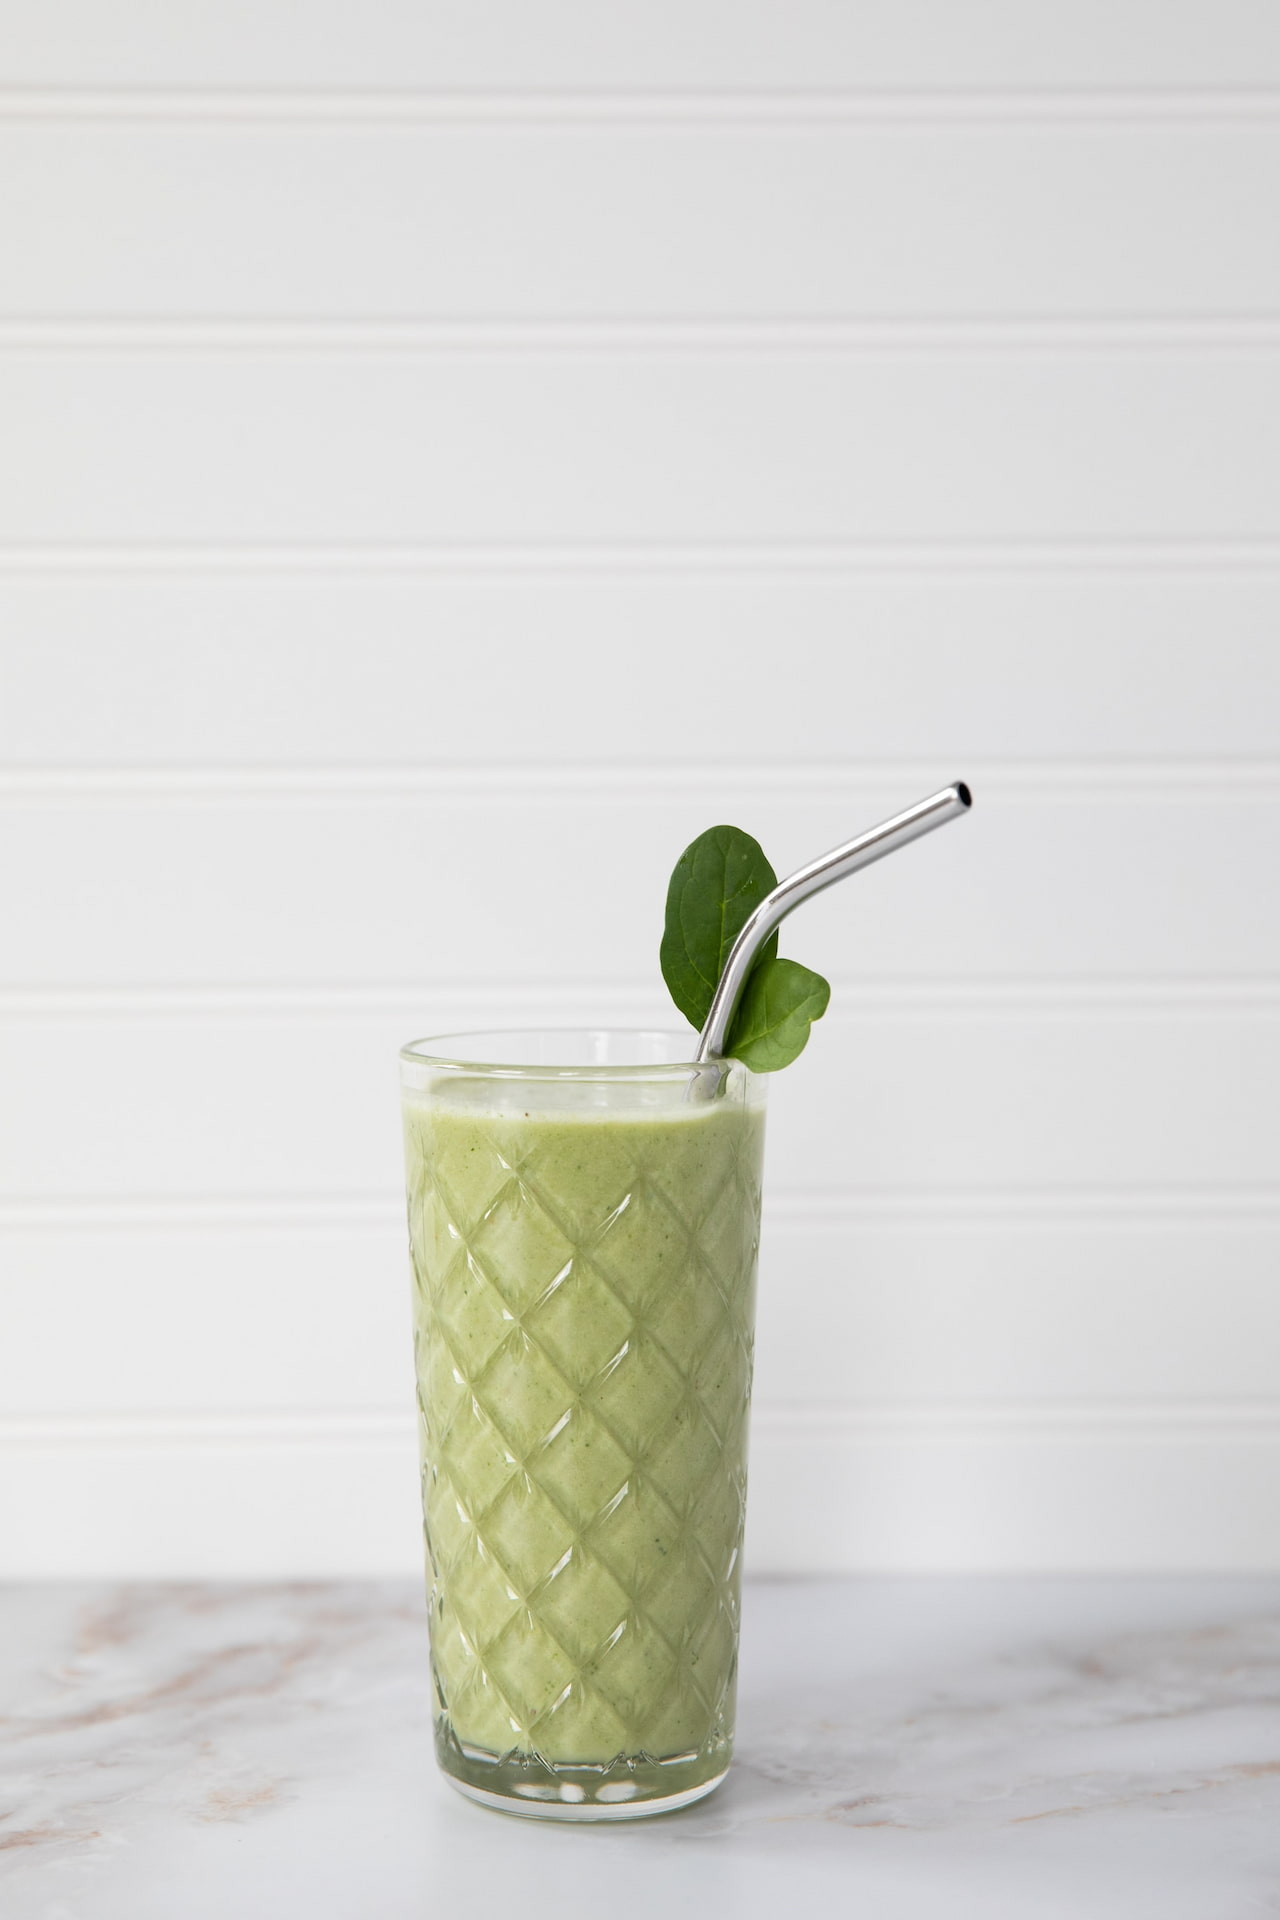 A clear glass of green shake with a metallic straw near a white wall